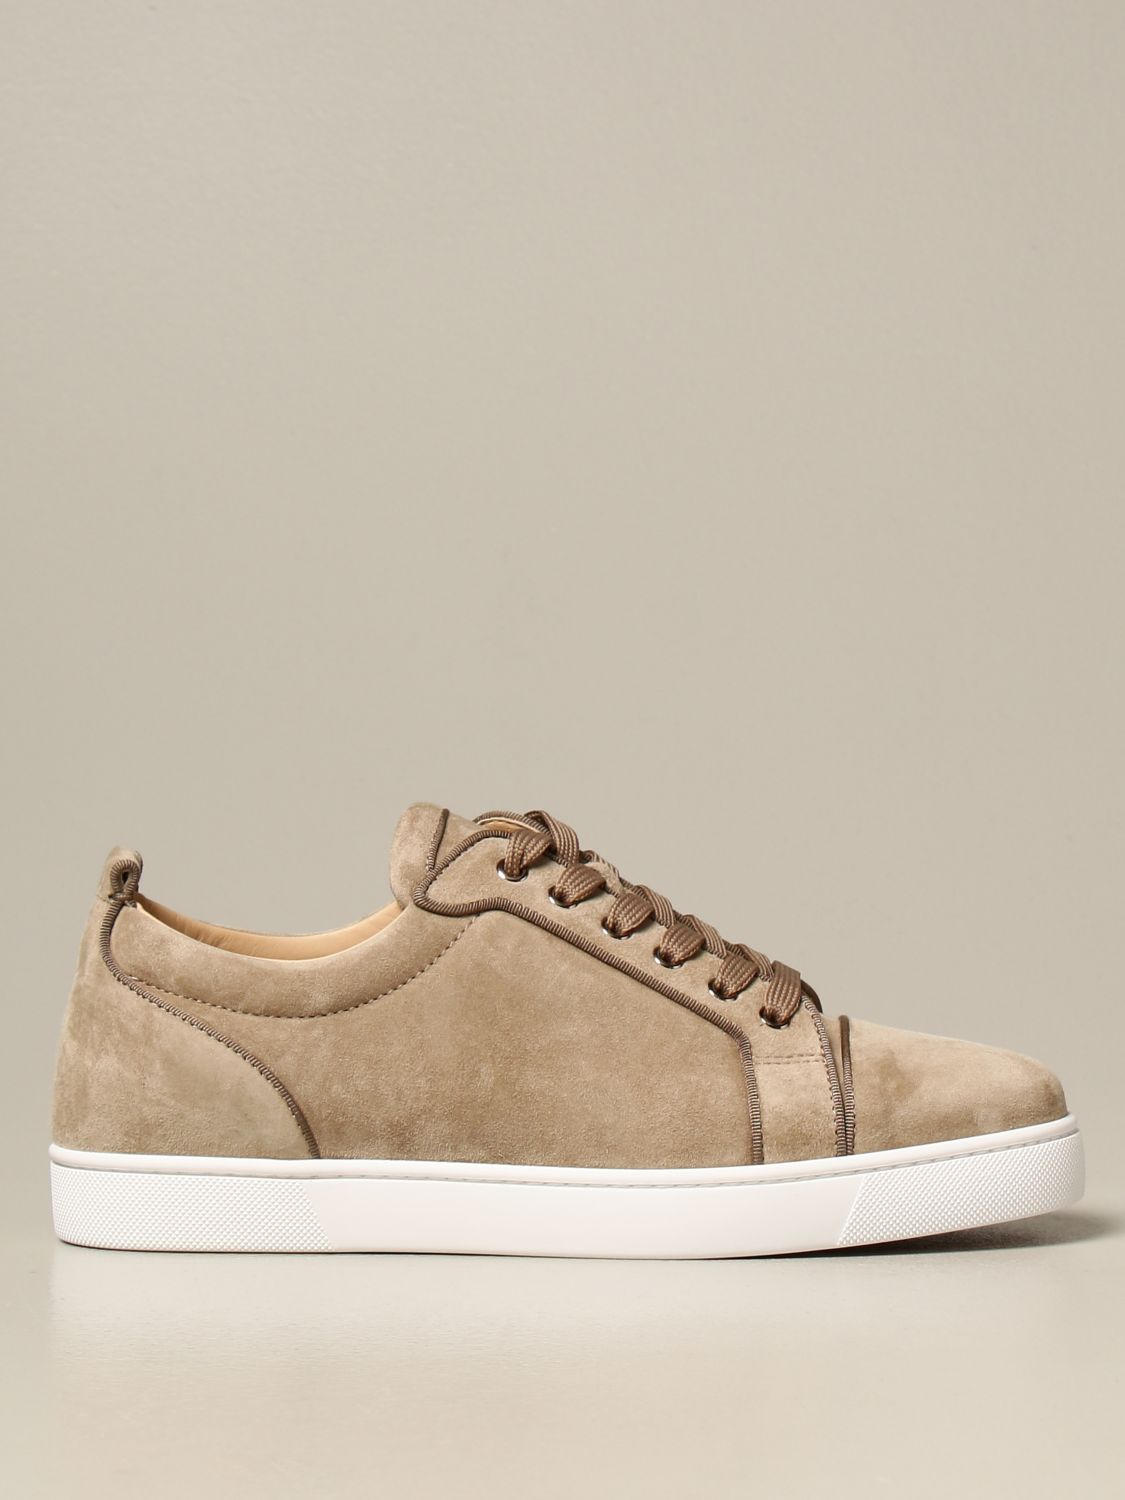 CHRISTIAN LOUBOUTIN: Junior sneakers in suede | Sneakers Christian Louboutin Men Beige | Sneakers Christian Louboutin 3190824 GIGLIO.COM